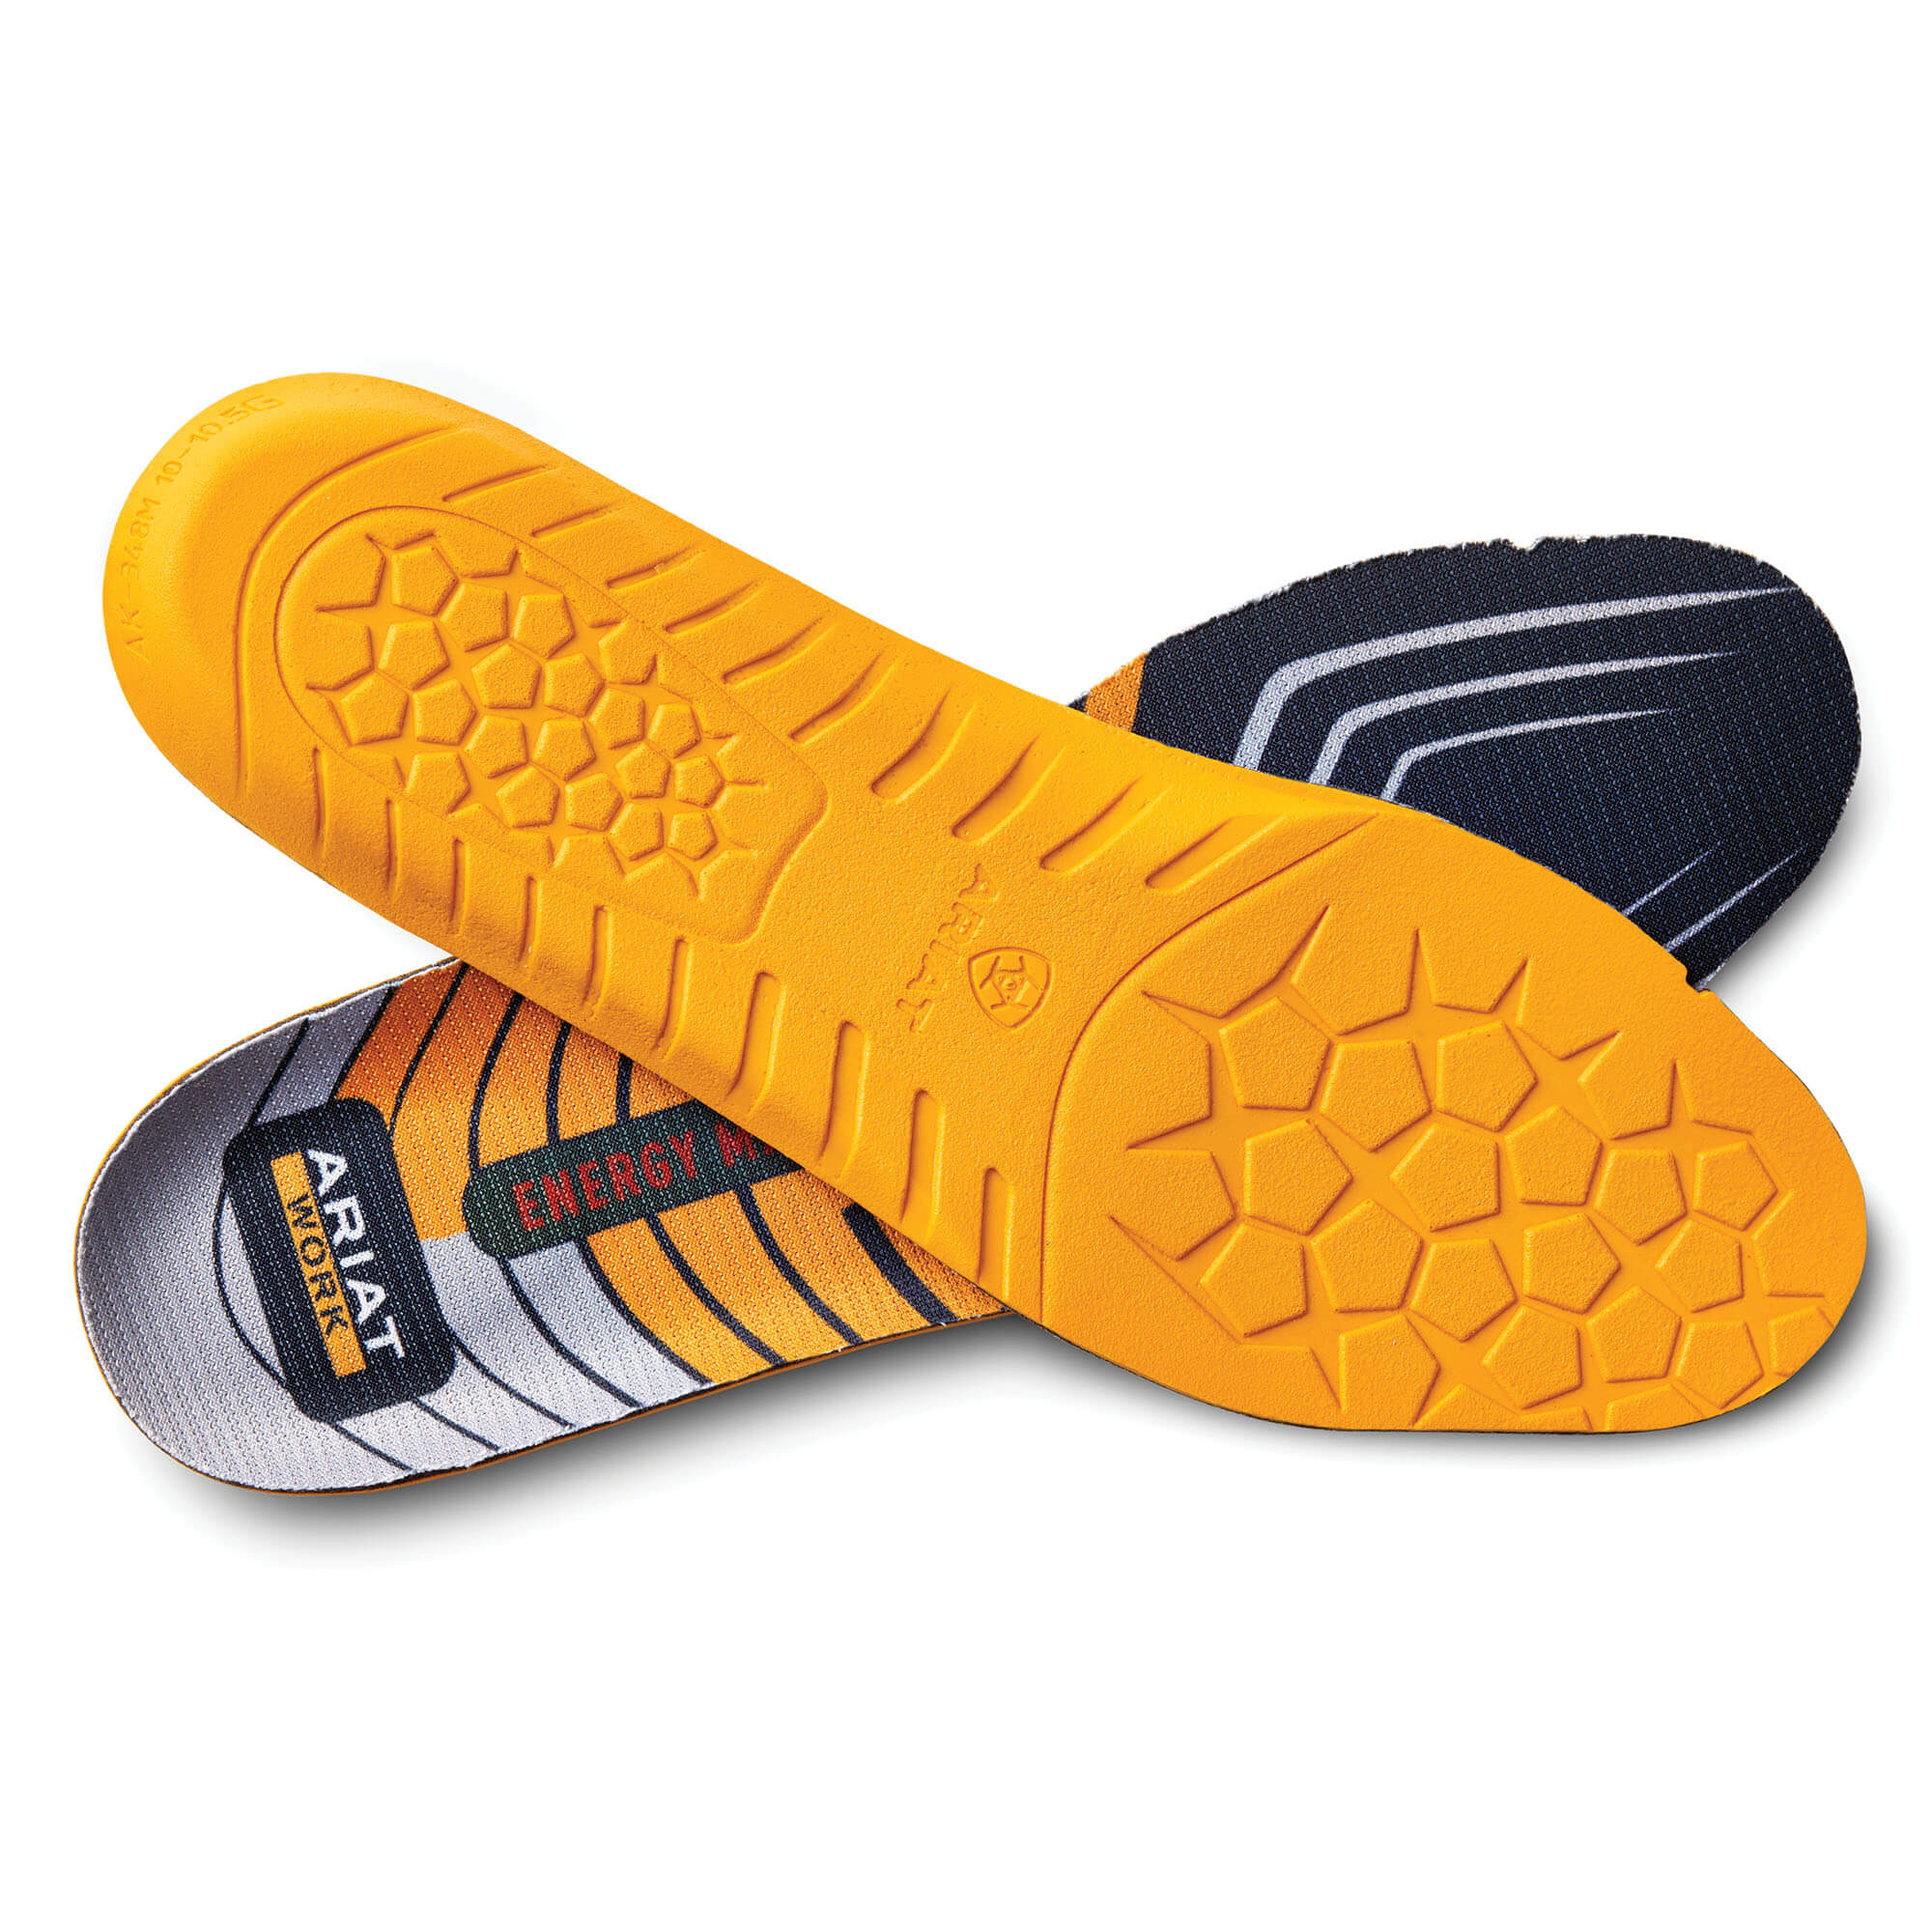 Can You Dye Ariat Insoles?